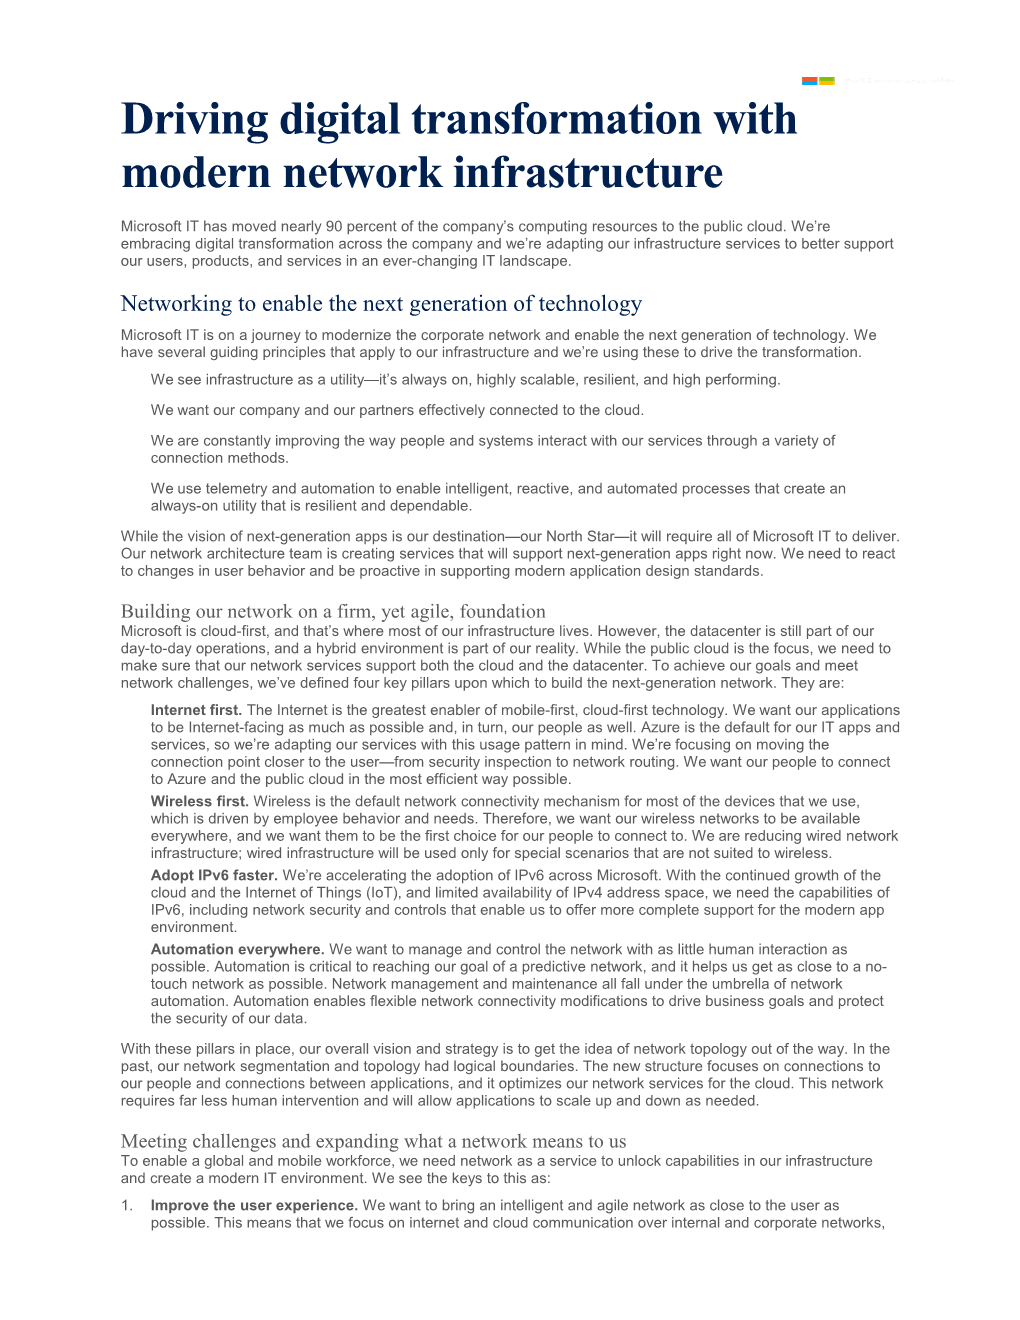 Driving Digital Transformation with Modern Network Infrastructure